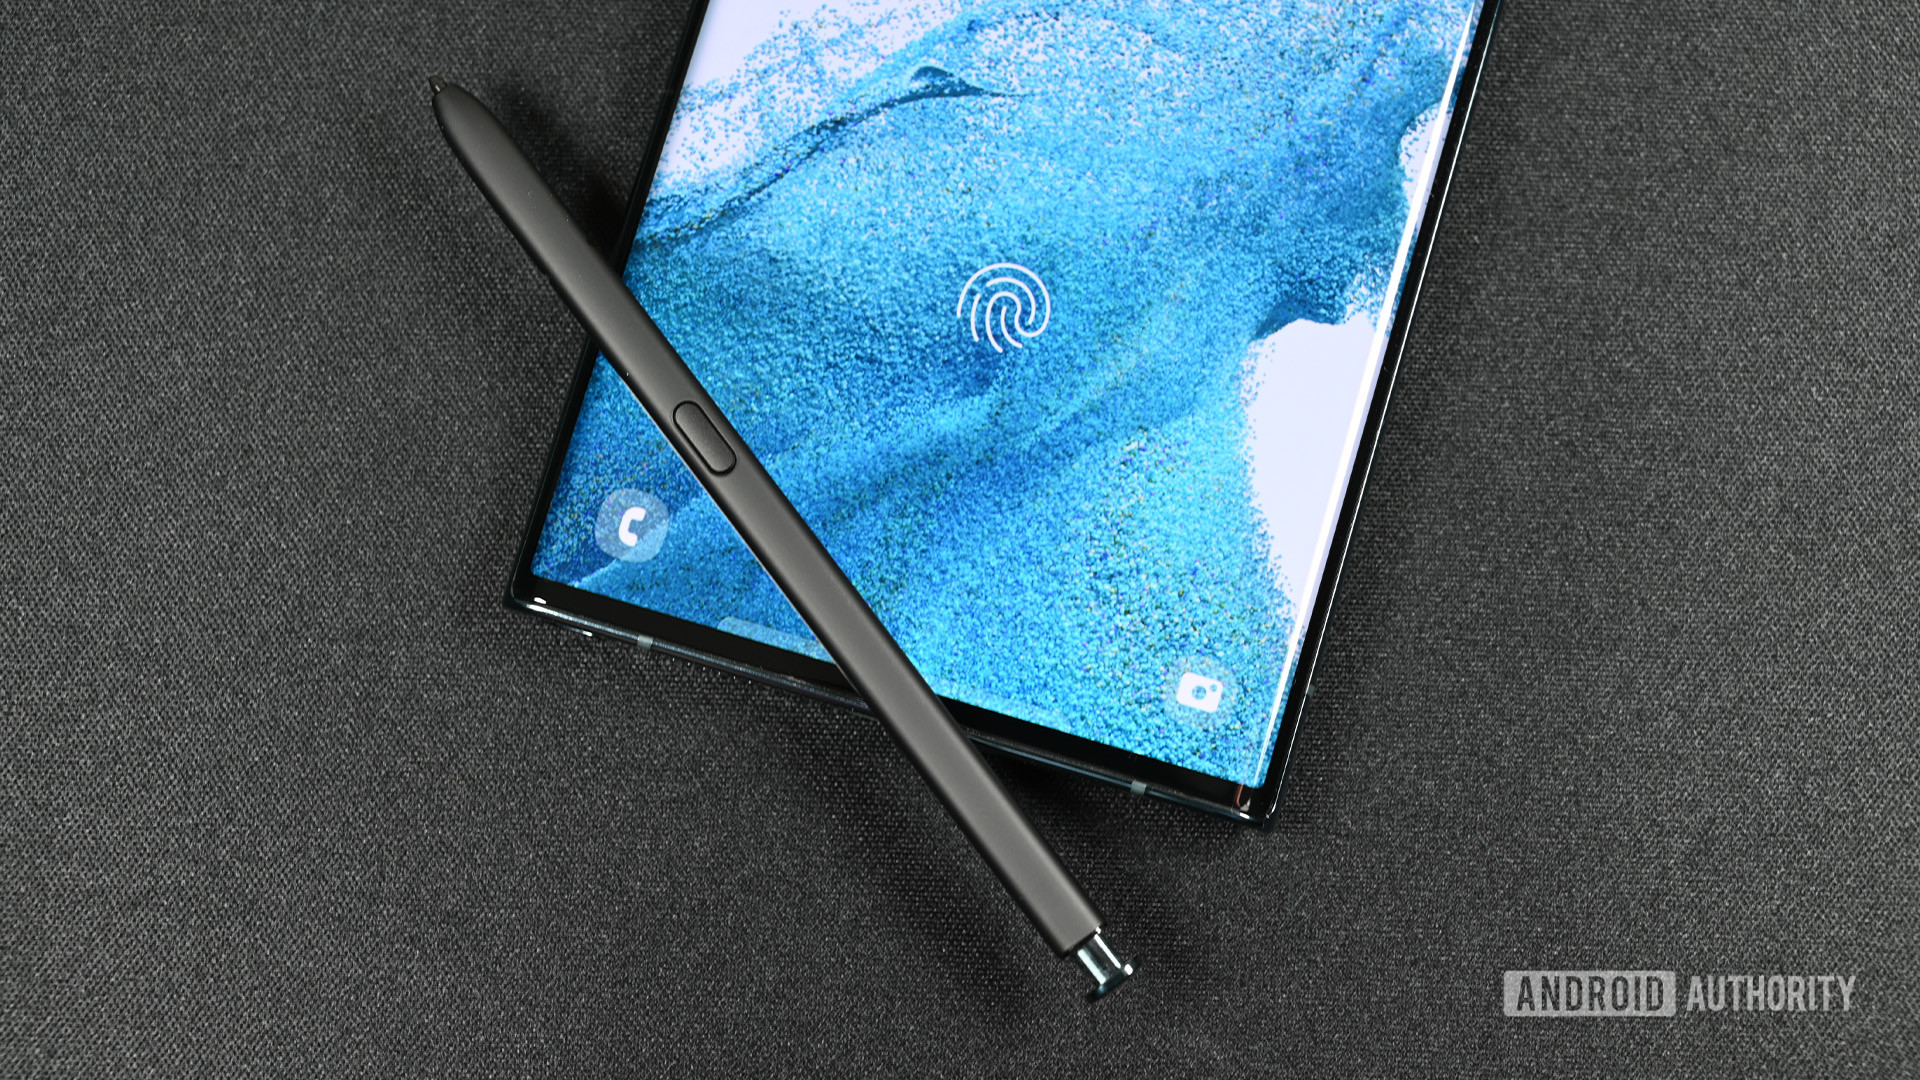 Writing on PDFs with a Surface Pen: The Ultimate Guide